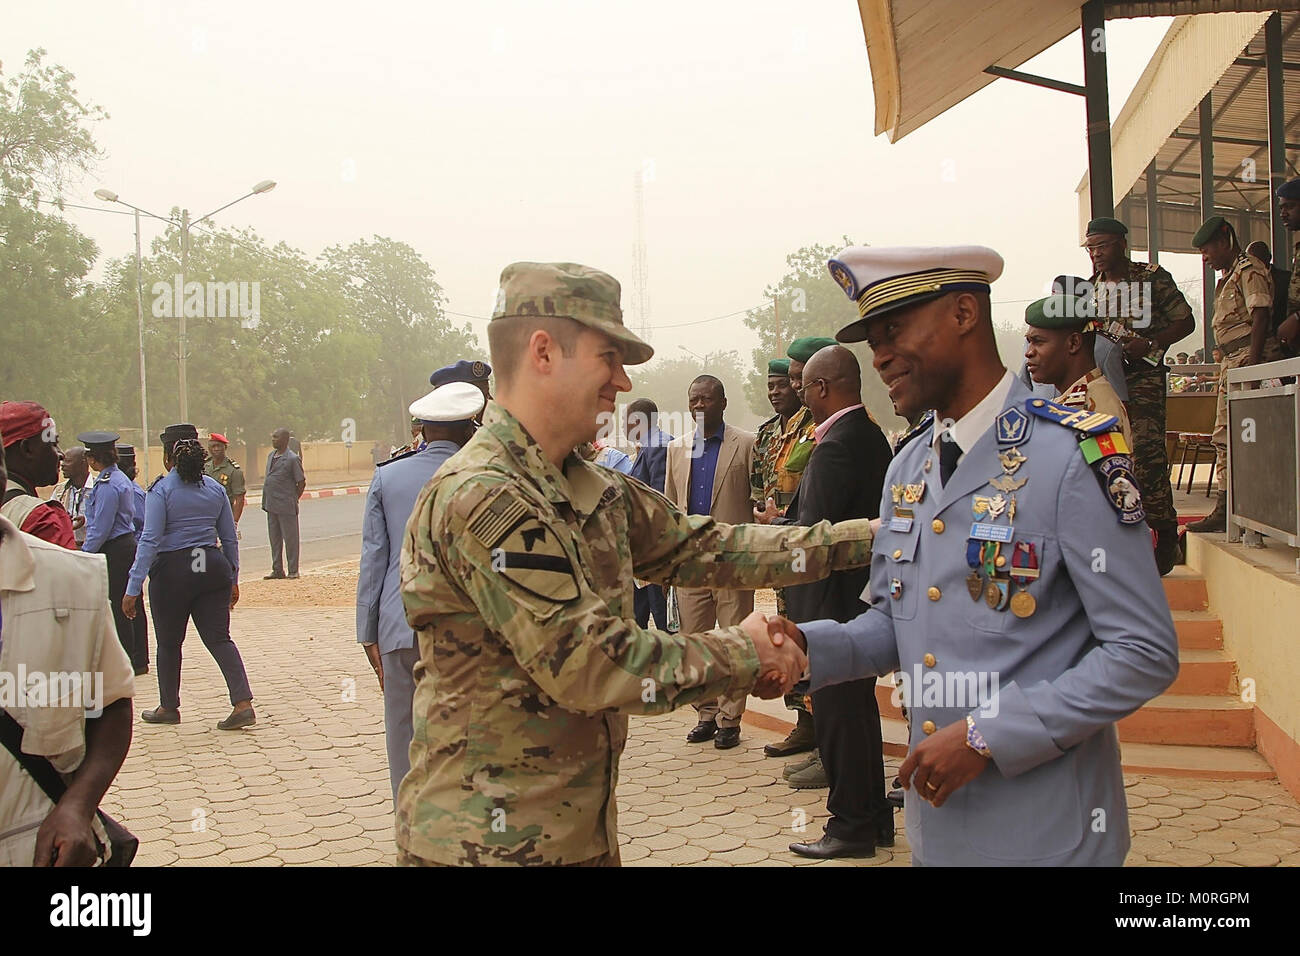 Maj. Andrzej Kujawski, Task Force Darby commander at CL Garoua, congratulates Cameroonian Capt. Patrick Ongong, flying instructor at Cameroon Air Base 301, on his promotion to major, Jan. 1. TF Darby soldiers are serving in a support role for the Cameroon military’s fight against the violent extremist organization Boko Haram. Stock Photo